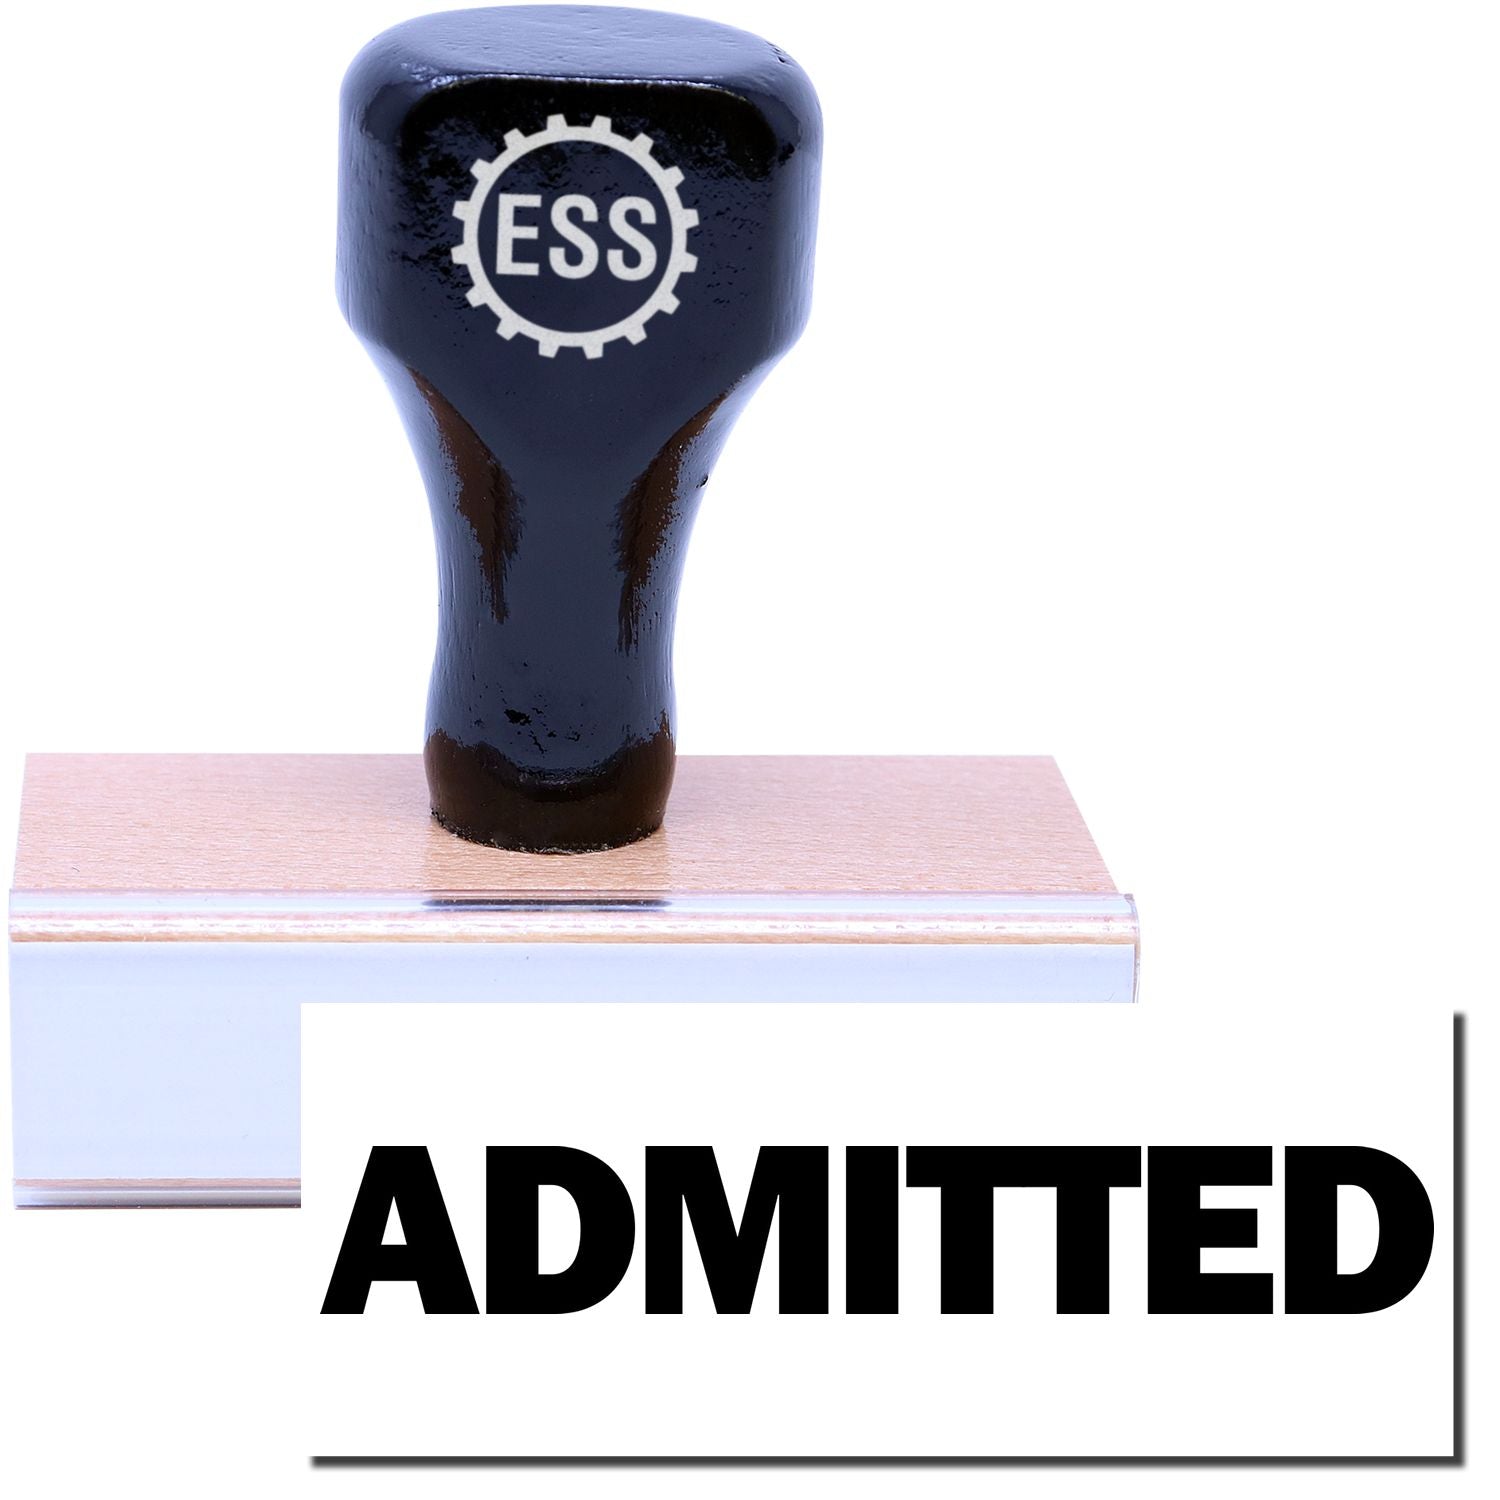 A stock office rubber stamp with a stamped image showing how the text "ADMITTED" in bold font is displayed after stamping.